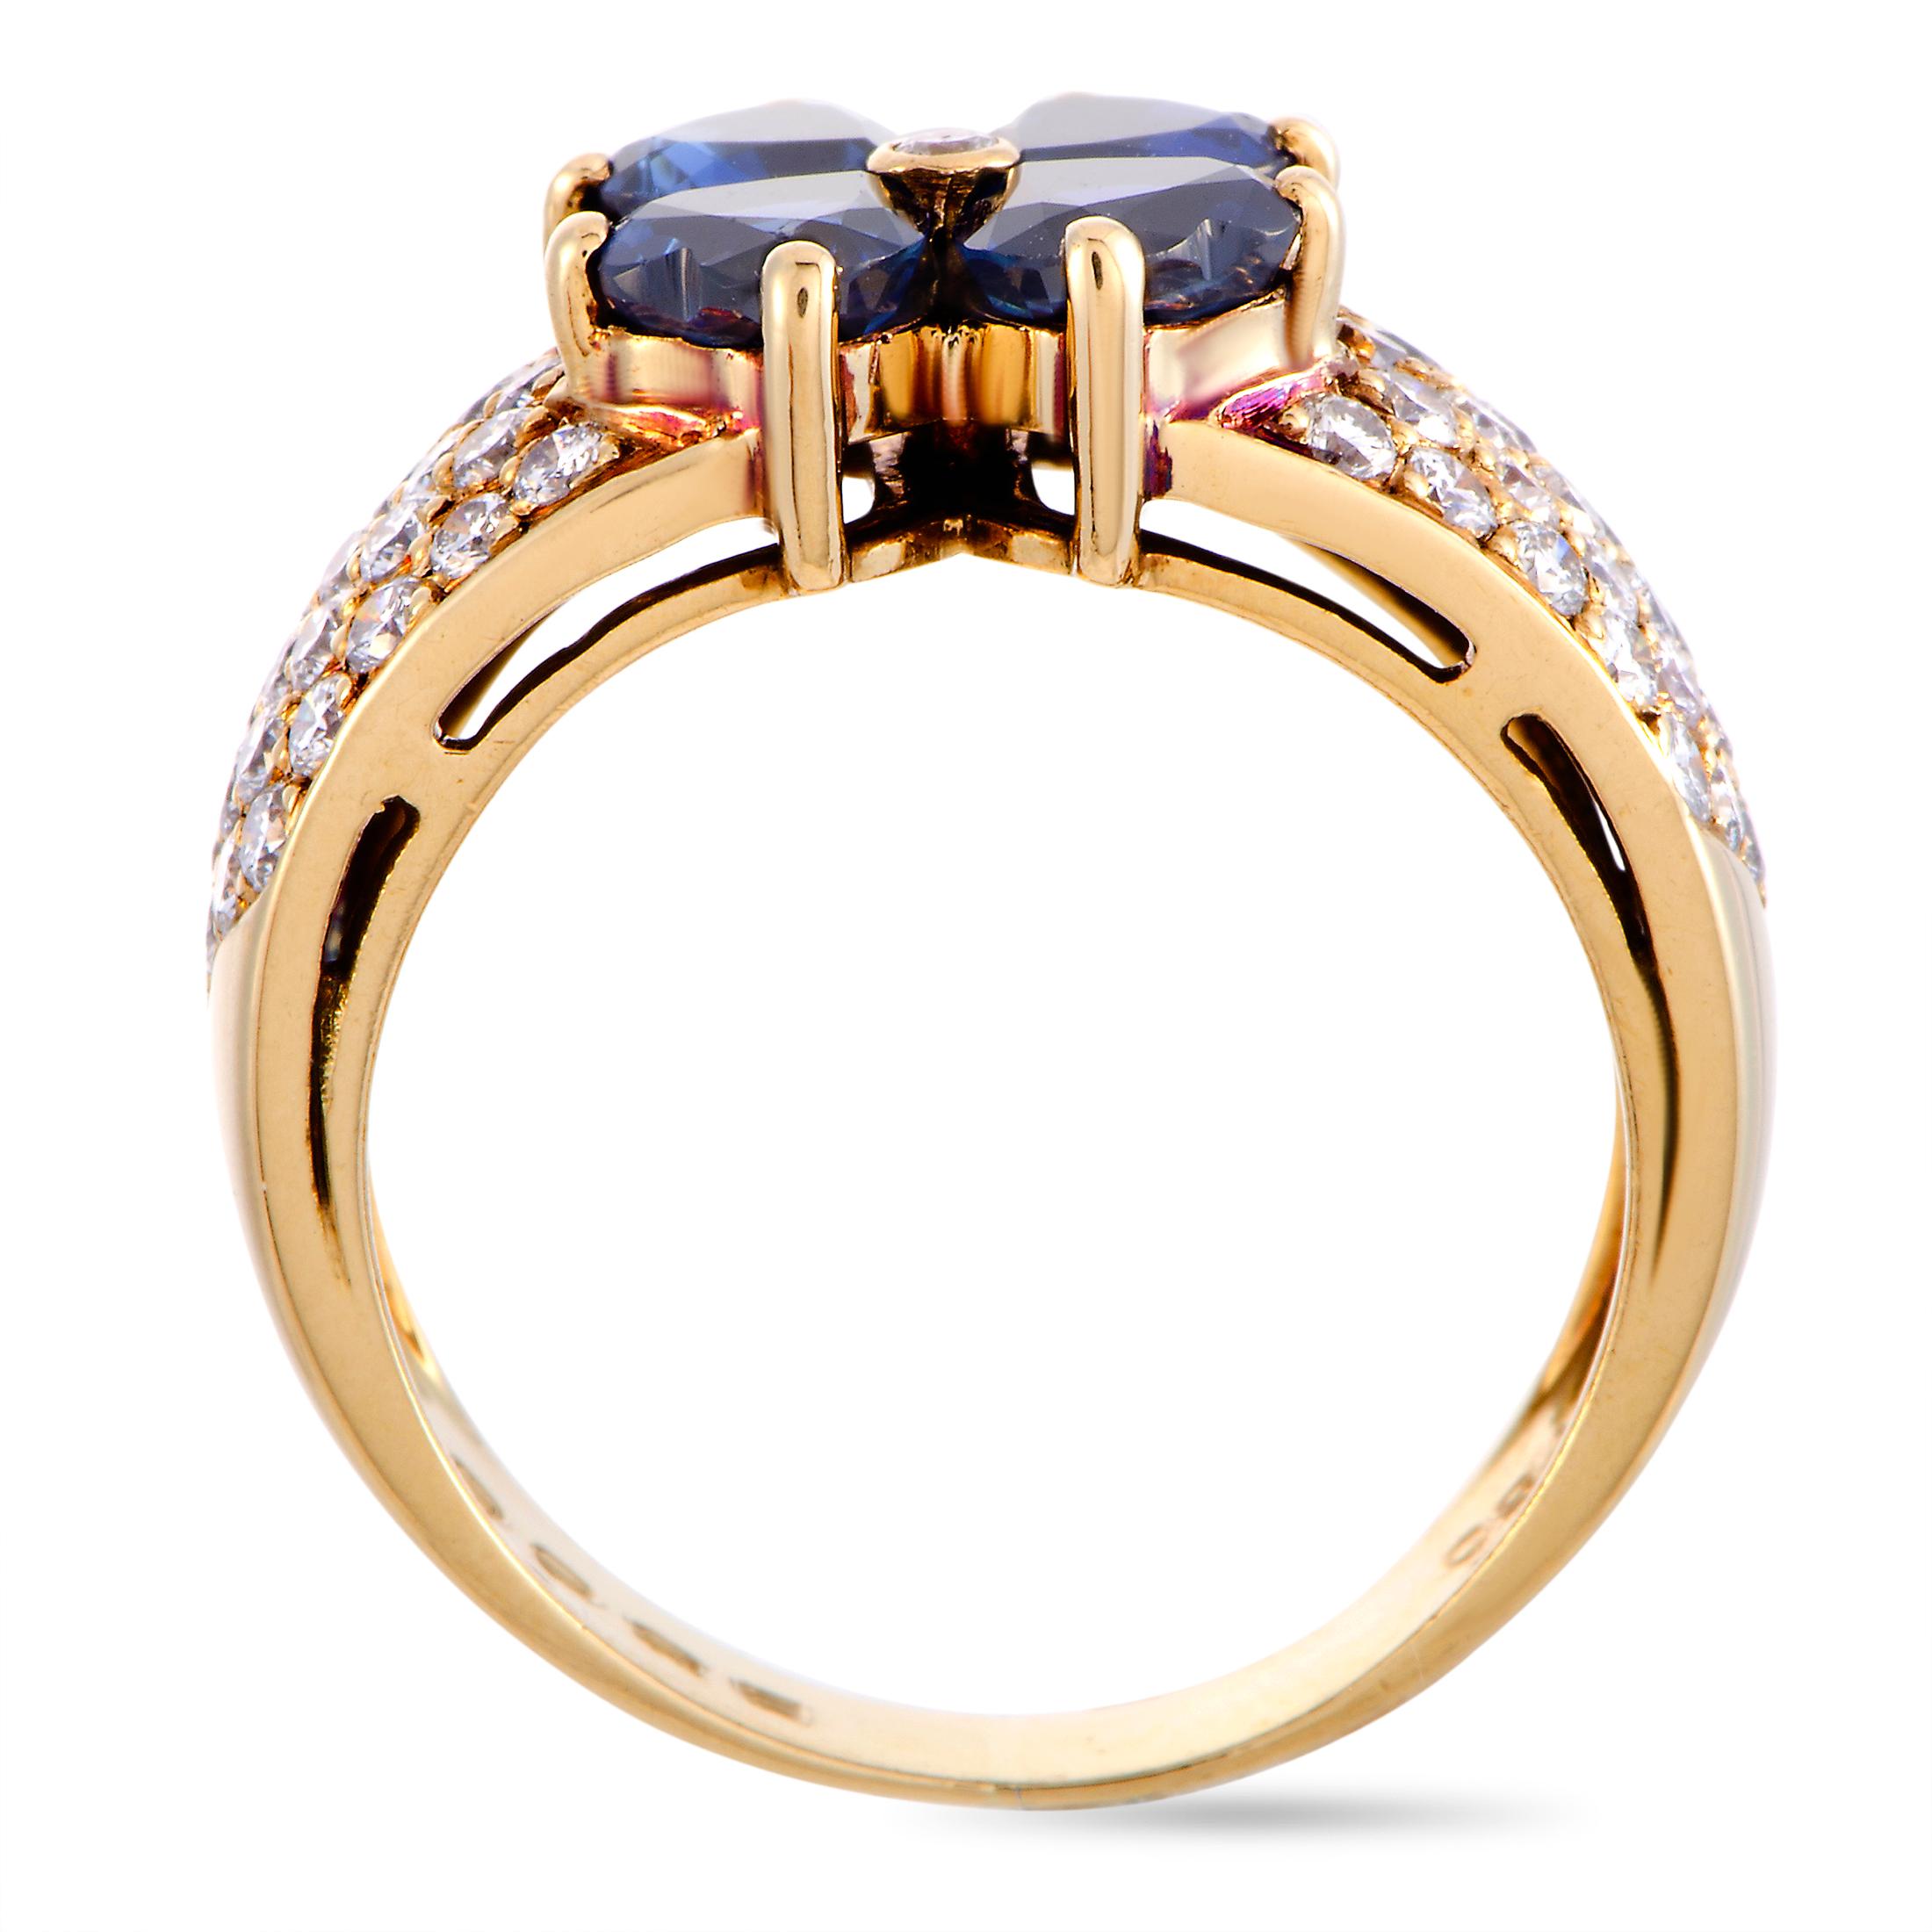 This Van Cleef & Arpels ring is made of 18K yellow gold and weighs 6 grams. It is set with a total of approximately 0.65 carats of diamonds and with four sapphires that weigh 1.00 carat in total. The ring boasts band thickness of 4 mm and top height